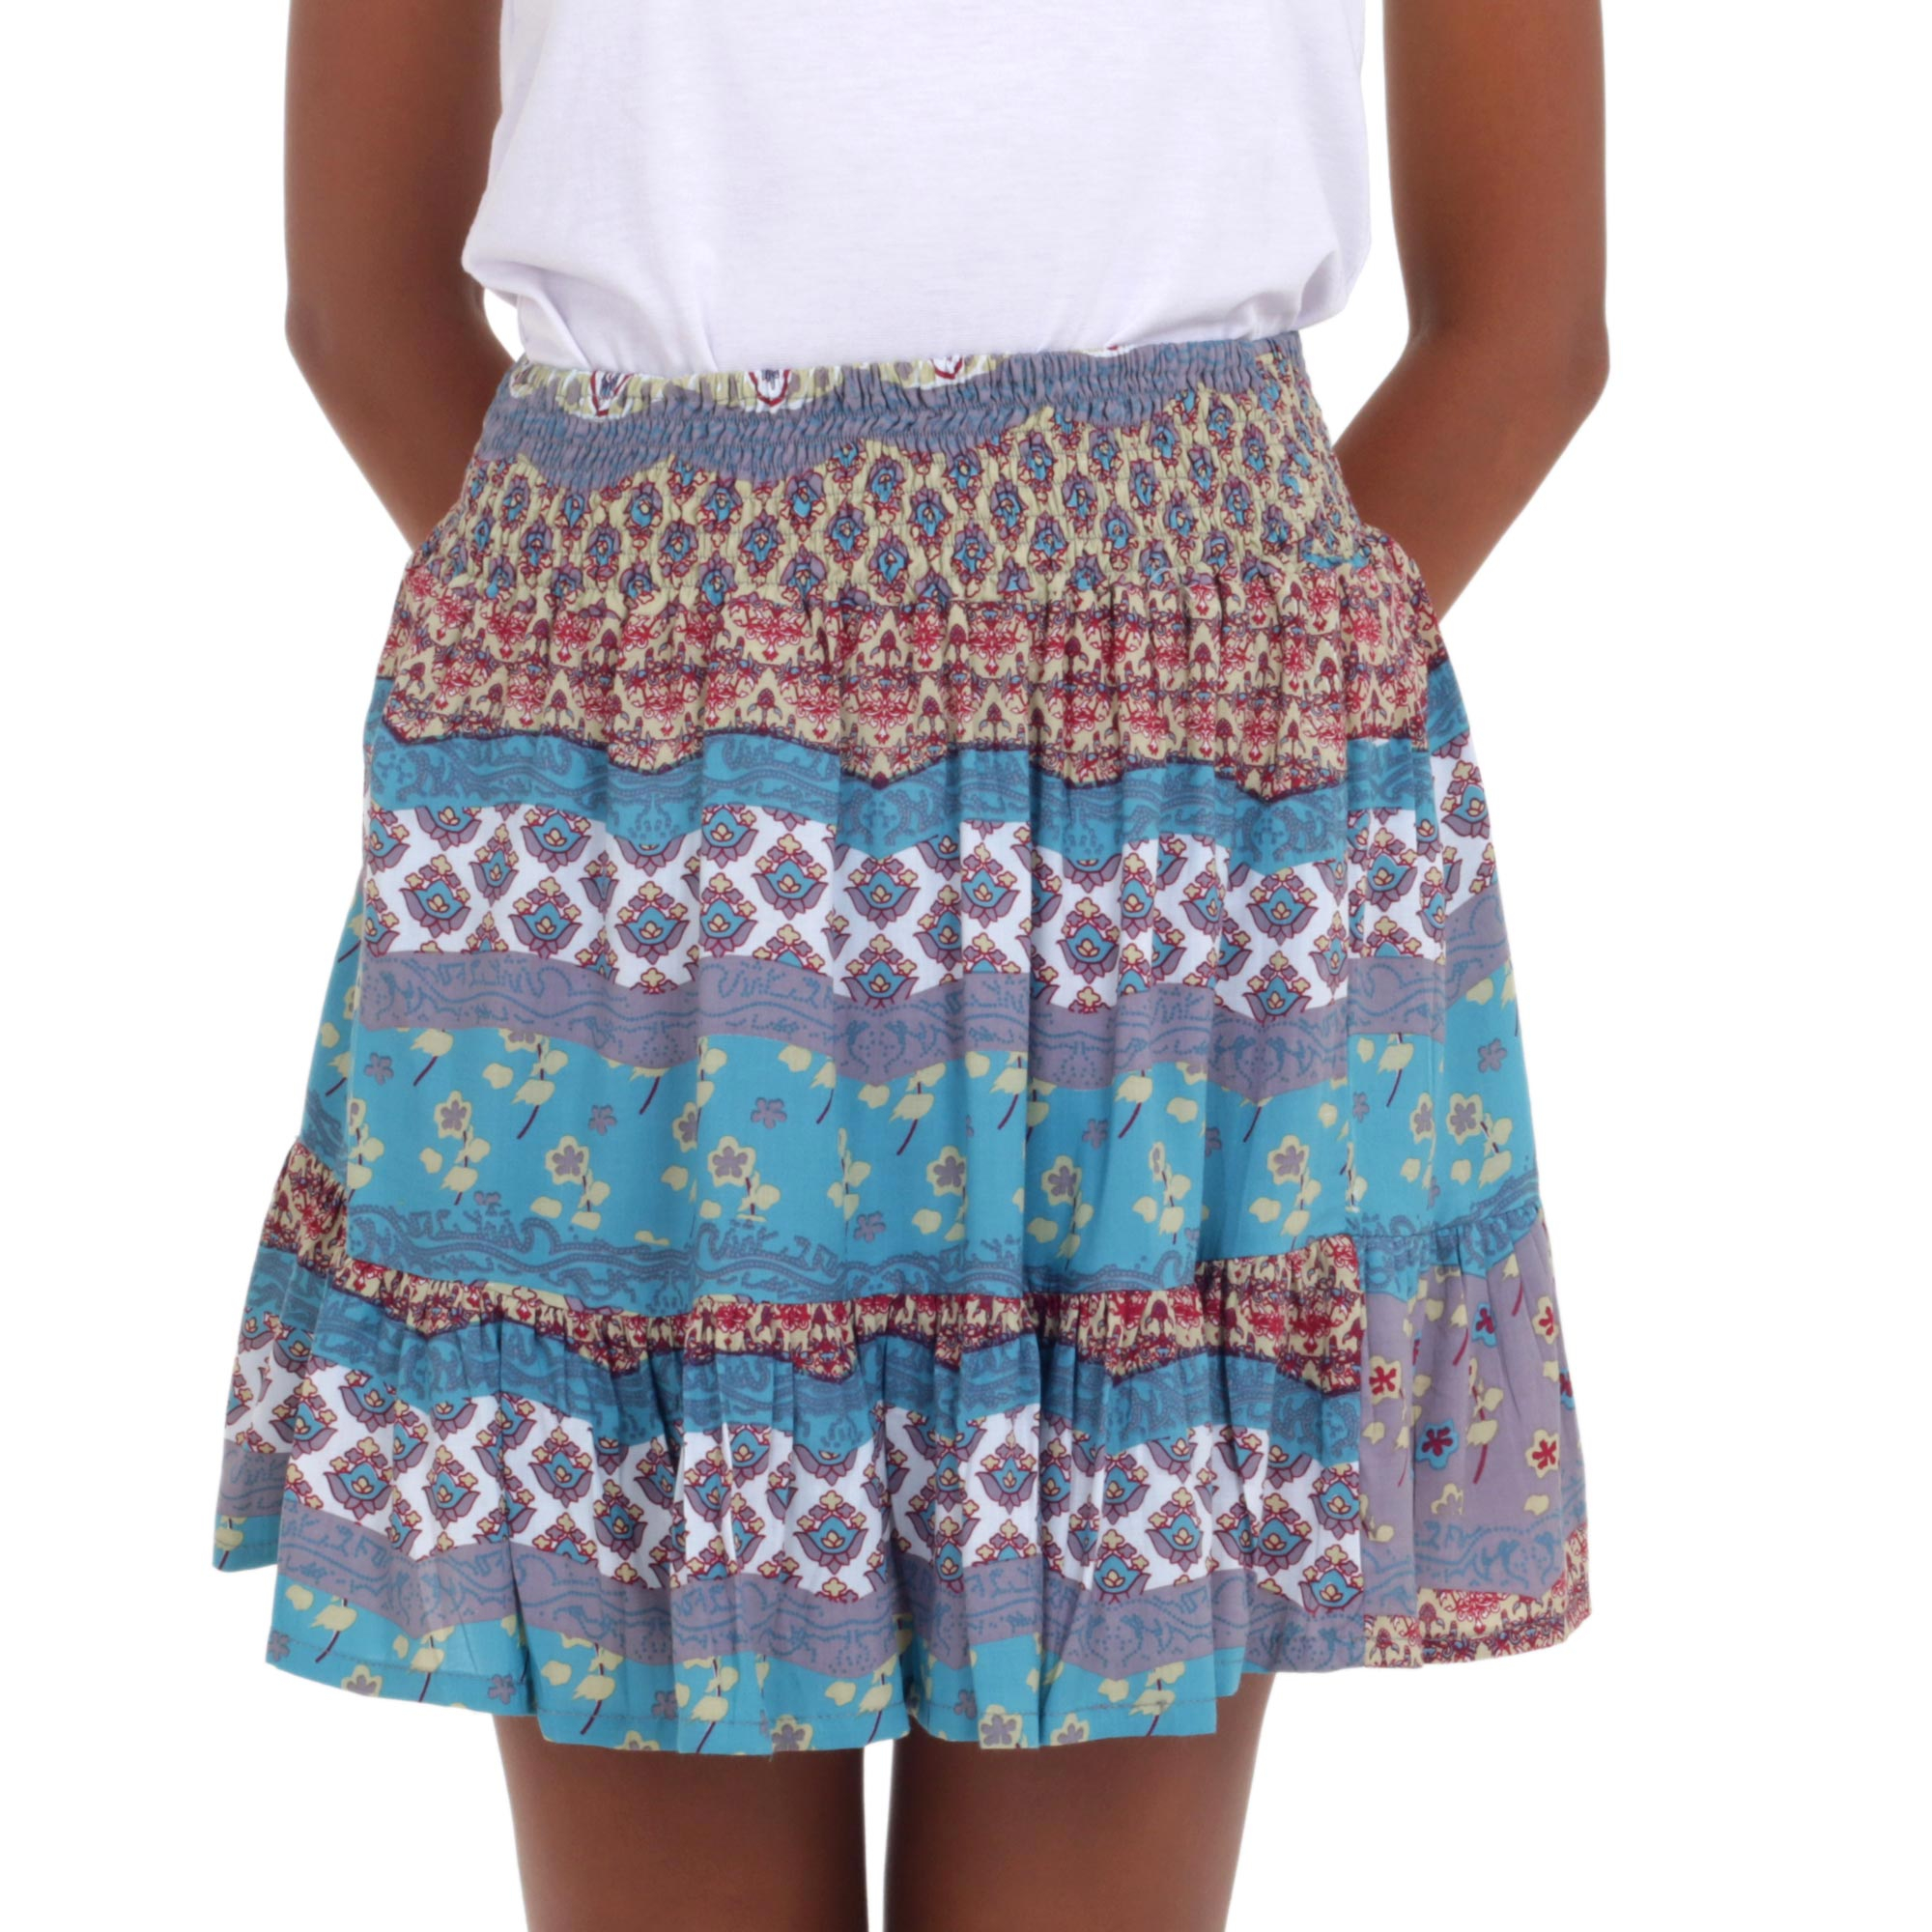 UNICEF Market | Turquoise and Grey Rayon Skirt from Indonesia - Morning ...